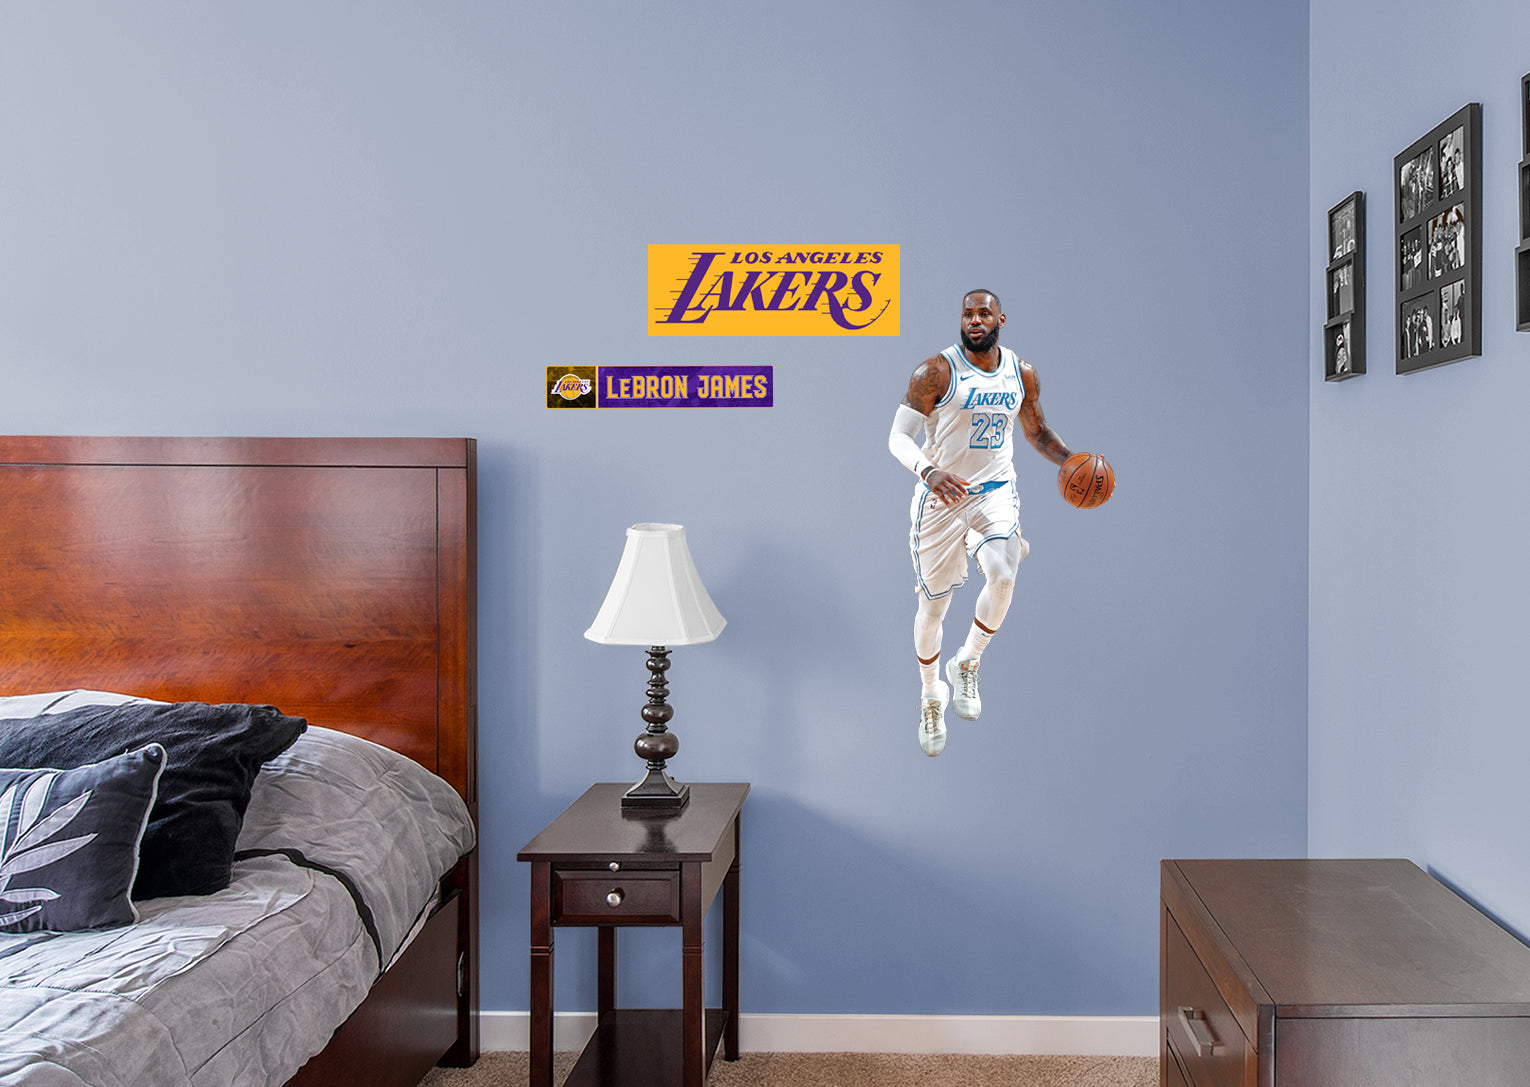 LeBron James 2021 City Jersey for Los Angeles Lakers - Officially Licensed NBA Removable Wall Decal Giant Athlete + 2 Decals (25